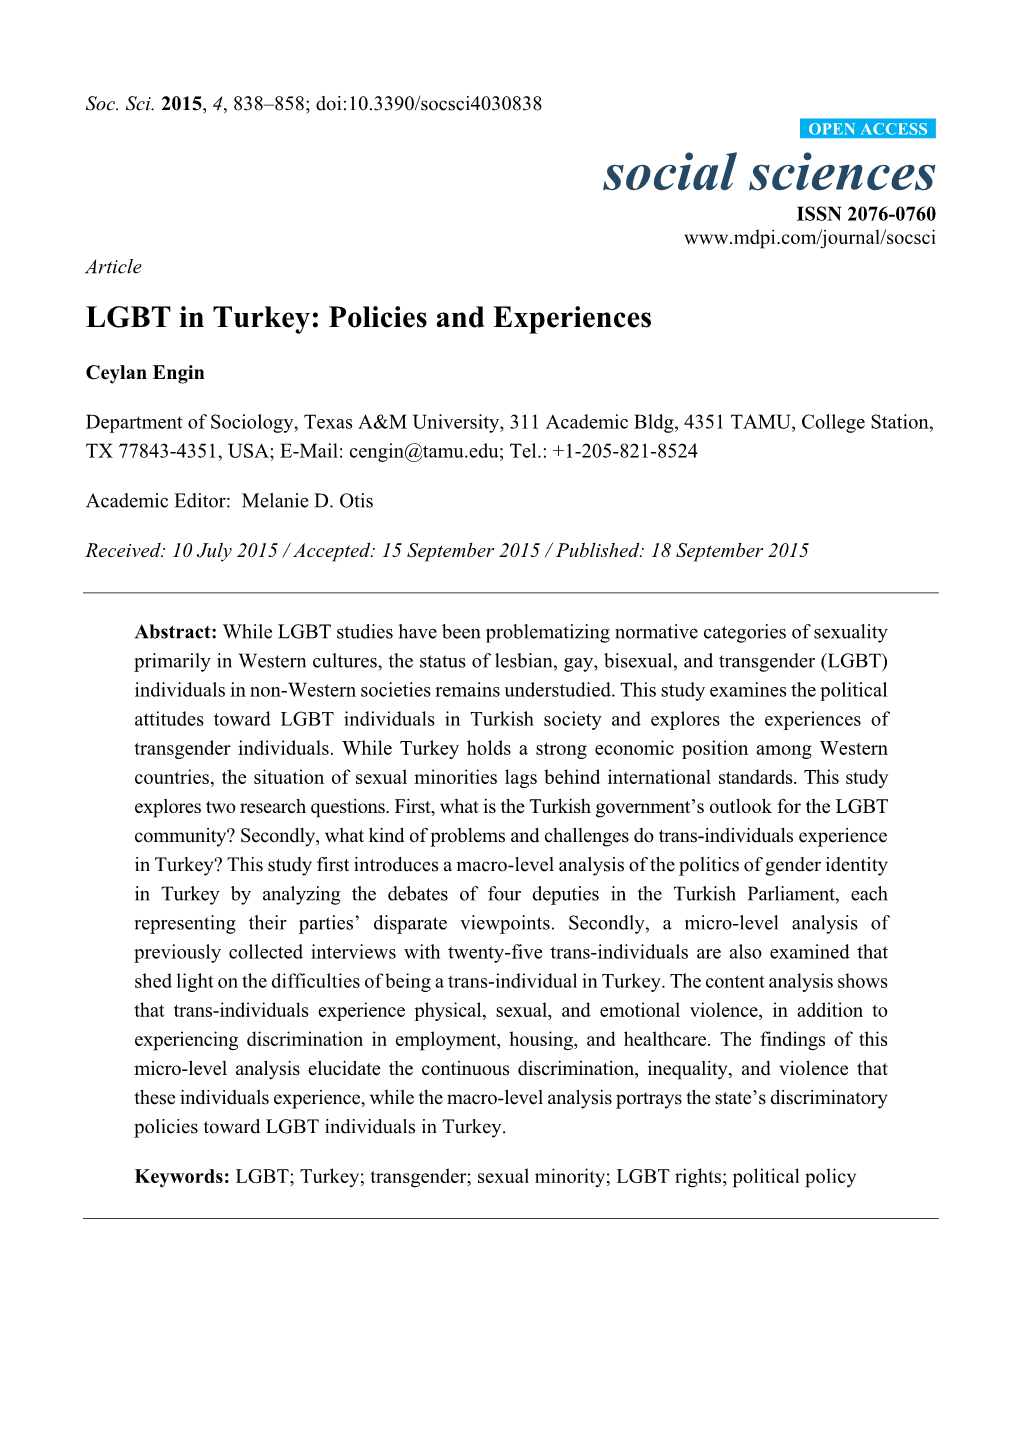 LGBT in Turkey: Policies and Experiences